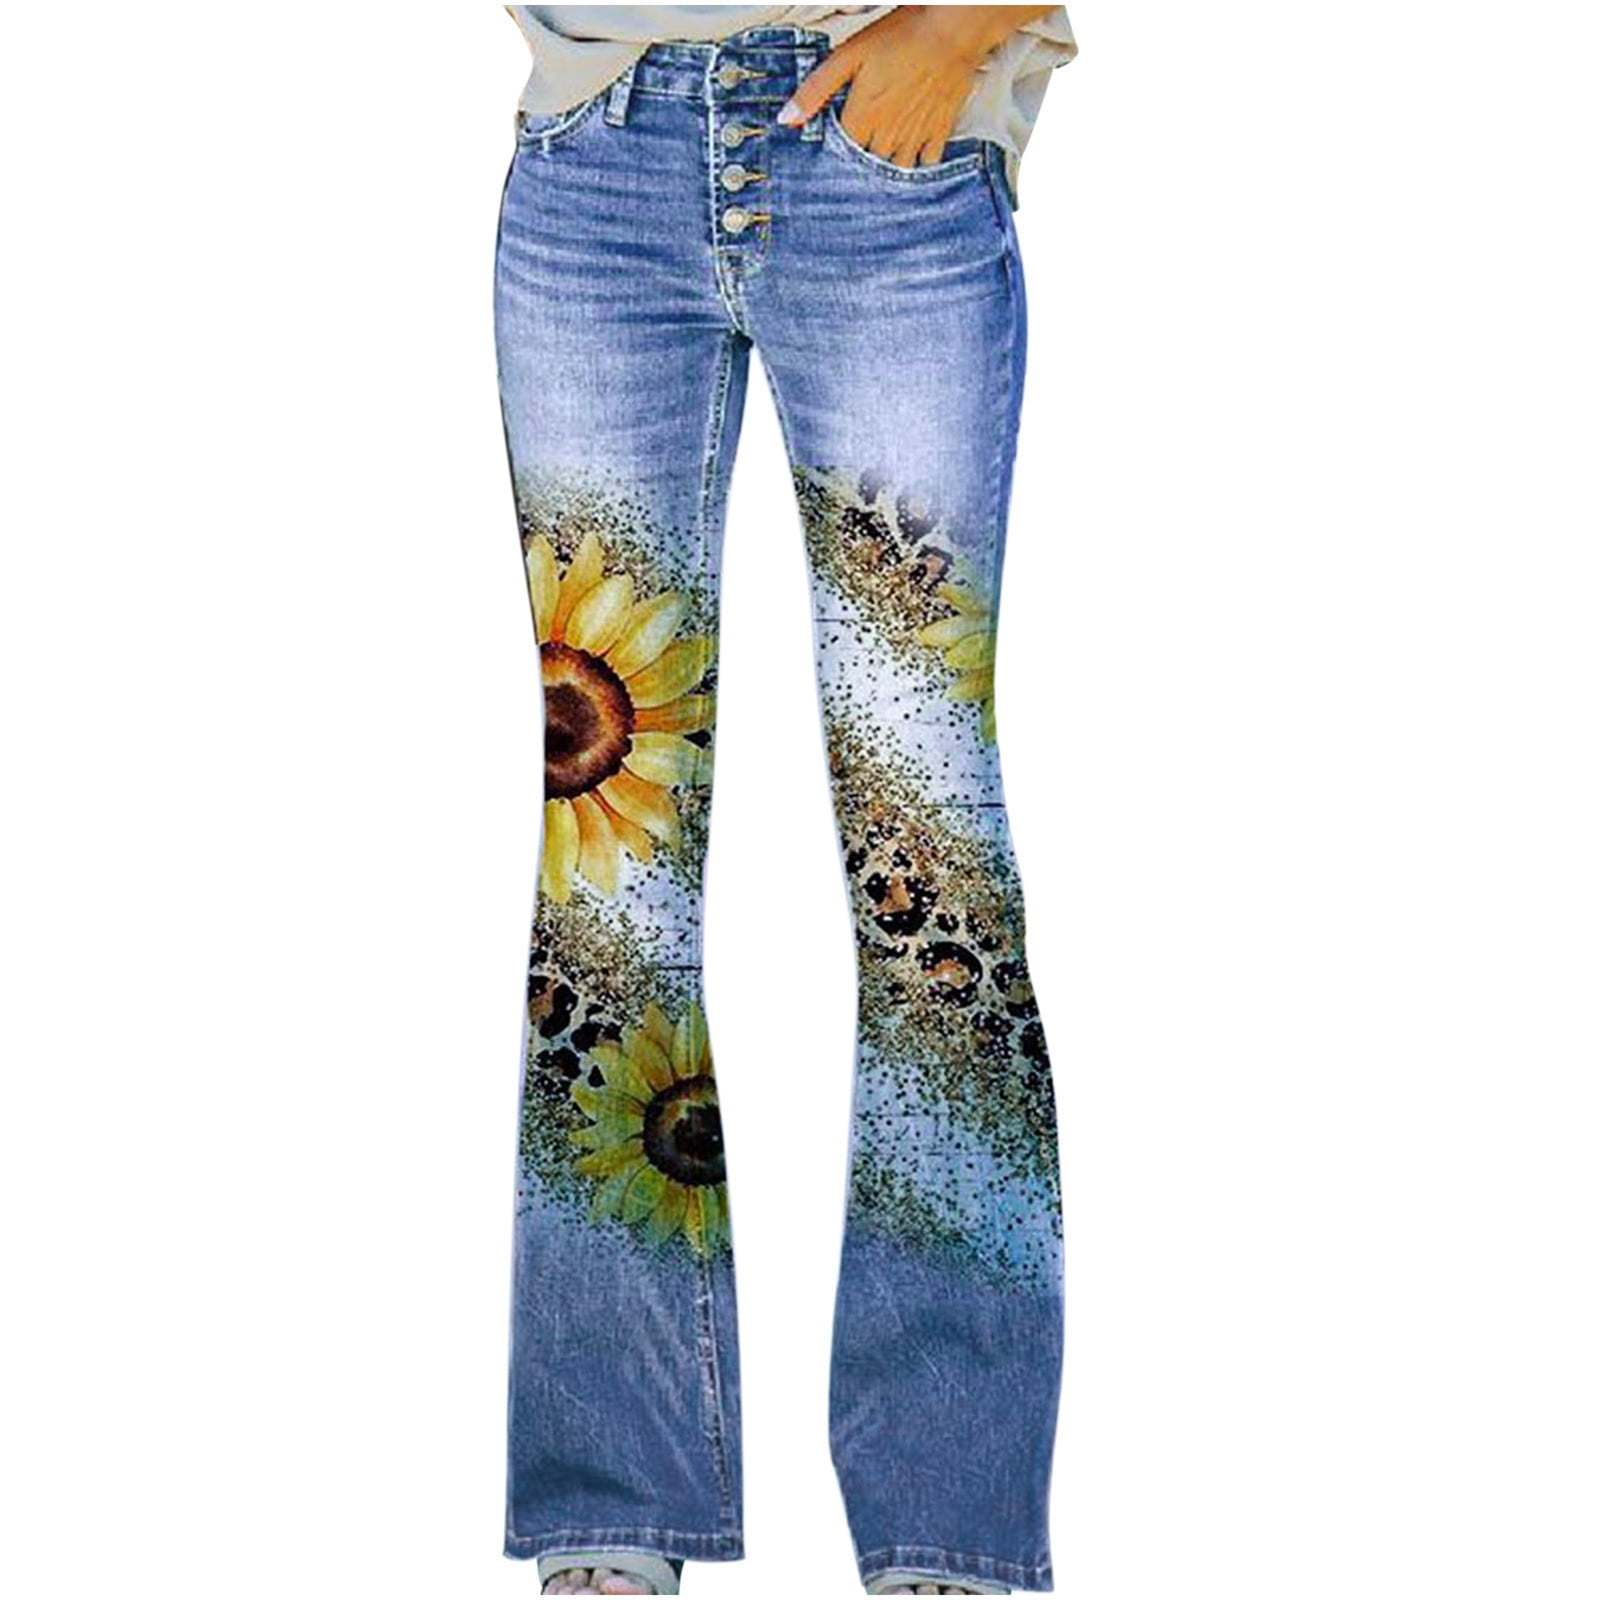 Bell Bottom Jeans for Women, Casual Vintage Low Rise Embroidery Floral Plus  Size Stretch Skinny Flare Leg Button Fly Pockets Denim Pants, Bootcut Jeans  for Women 